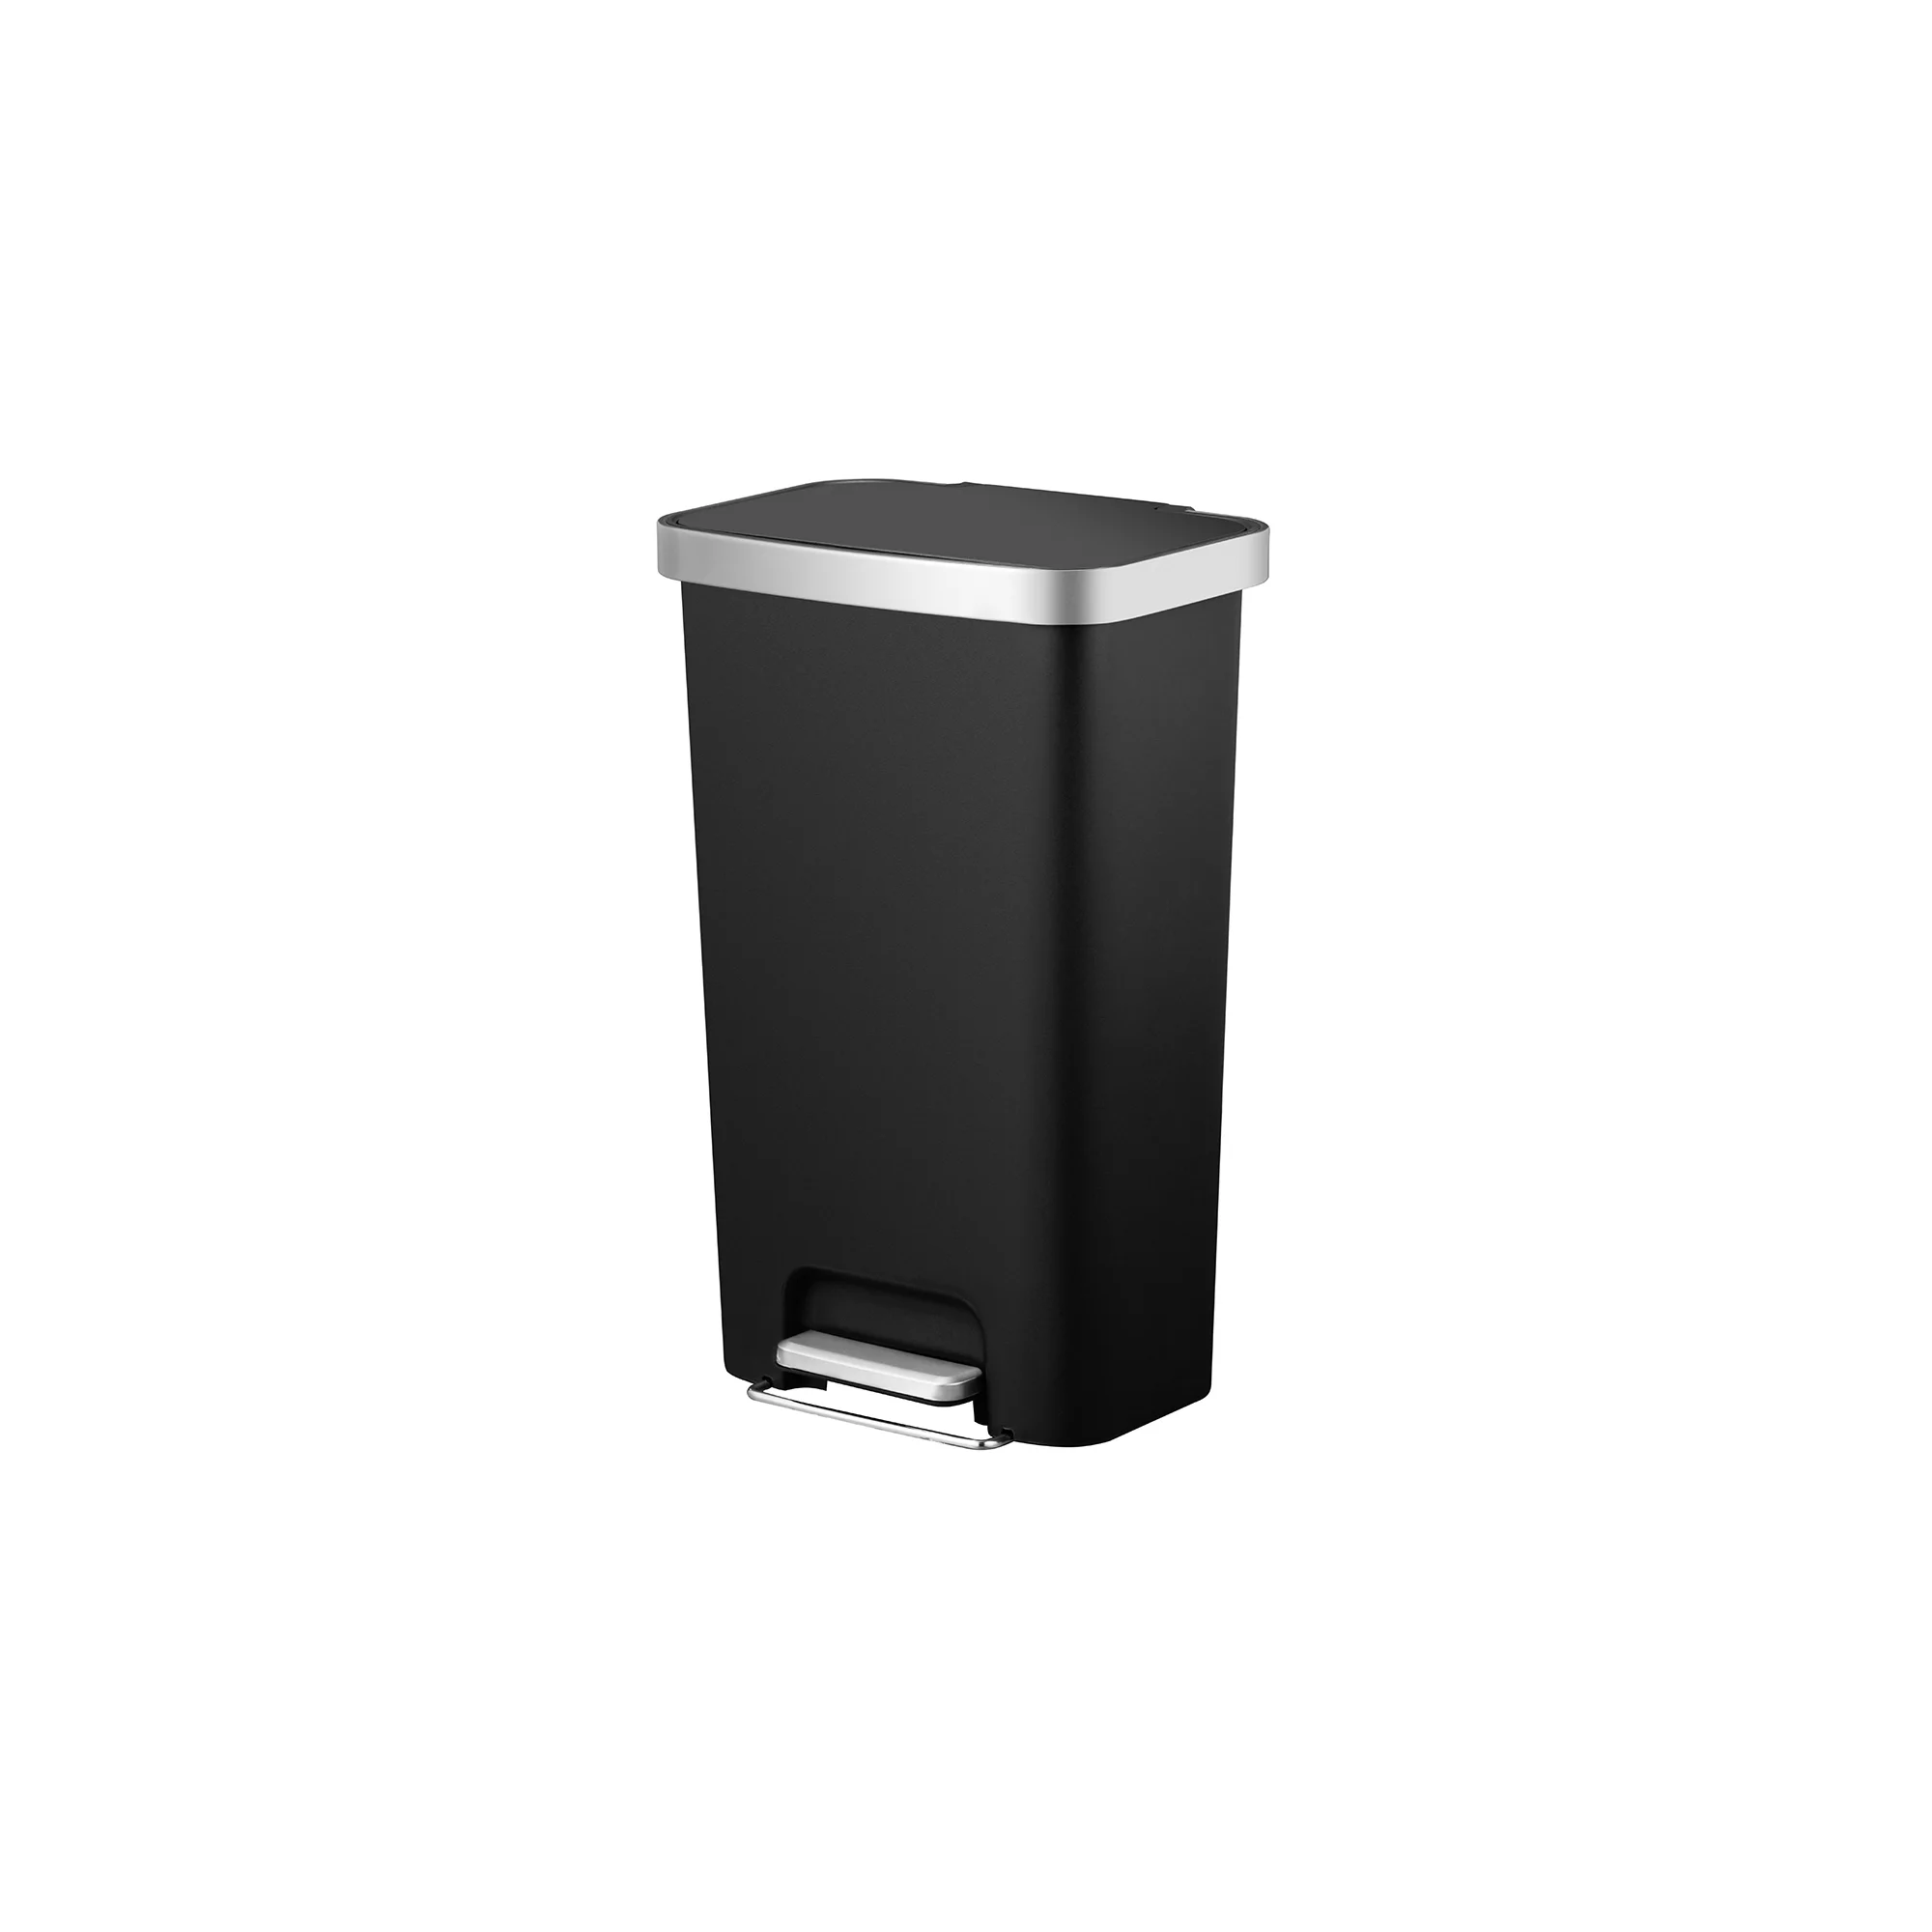 https://discounttoday.net/wp-content/uploads/2023/02/Better-Homes-Gardens-11.9-Gallon-Trash-Can-Plastic-Step-On-Kitchen-Trash-Can-Black.webp